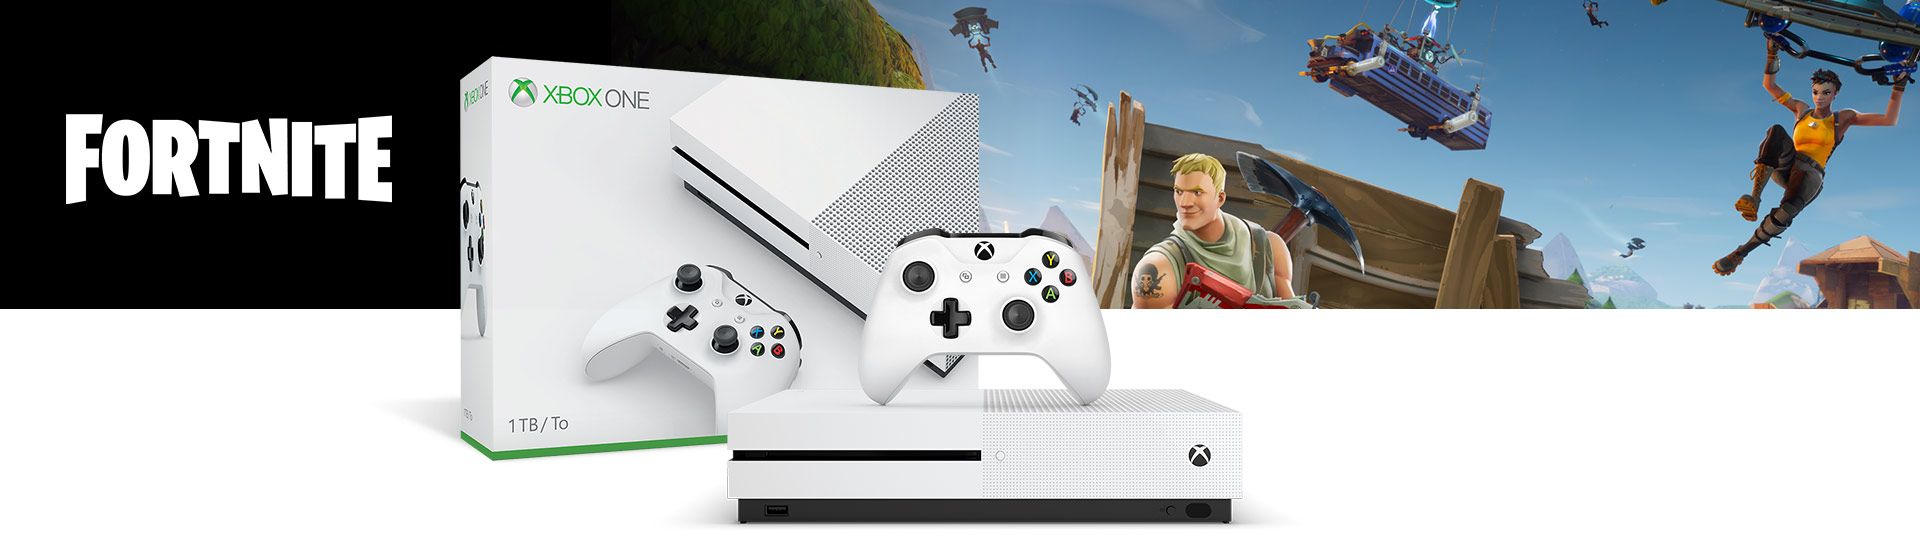 front view of xbox one s fortnite bundle with product box - v buck generator xbox one